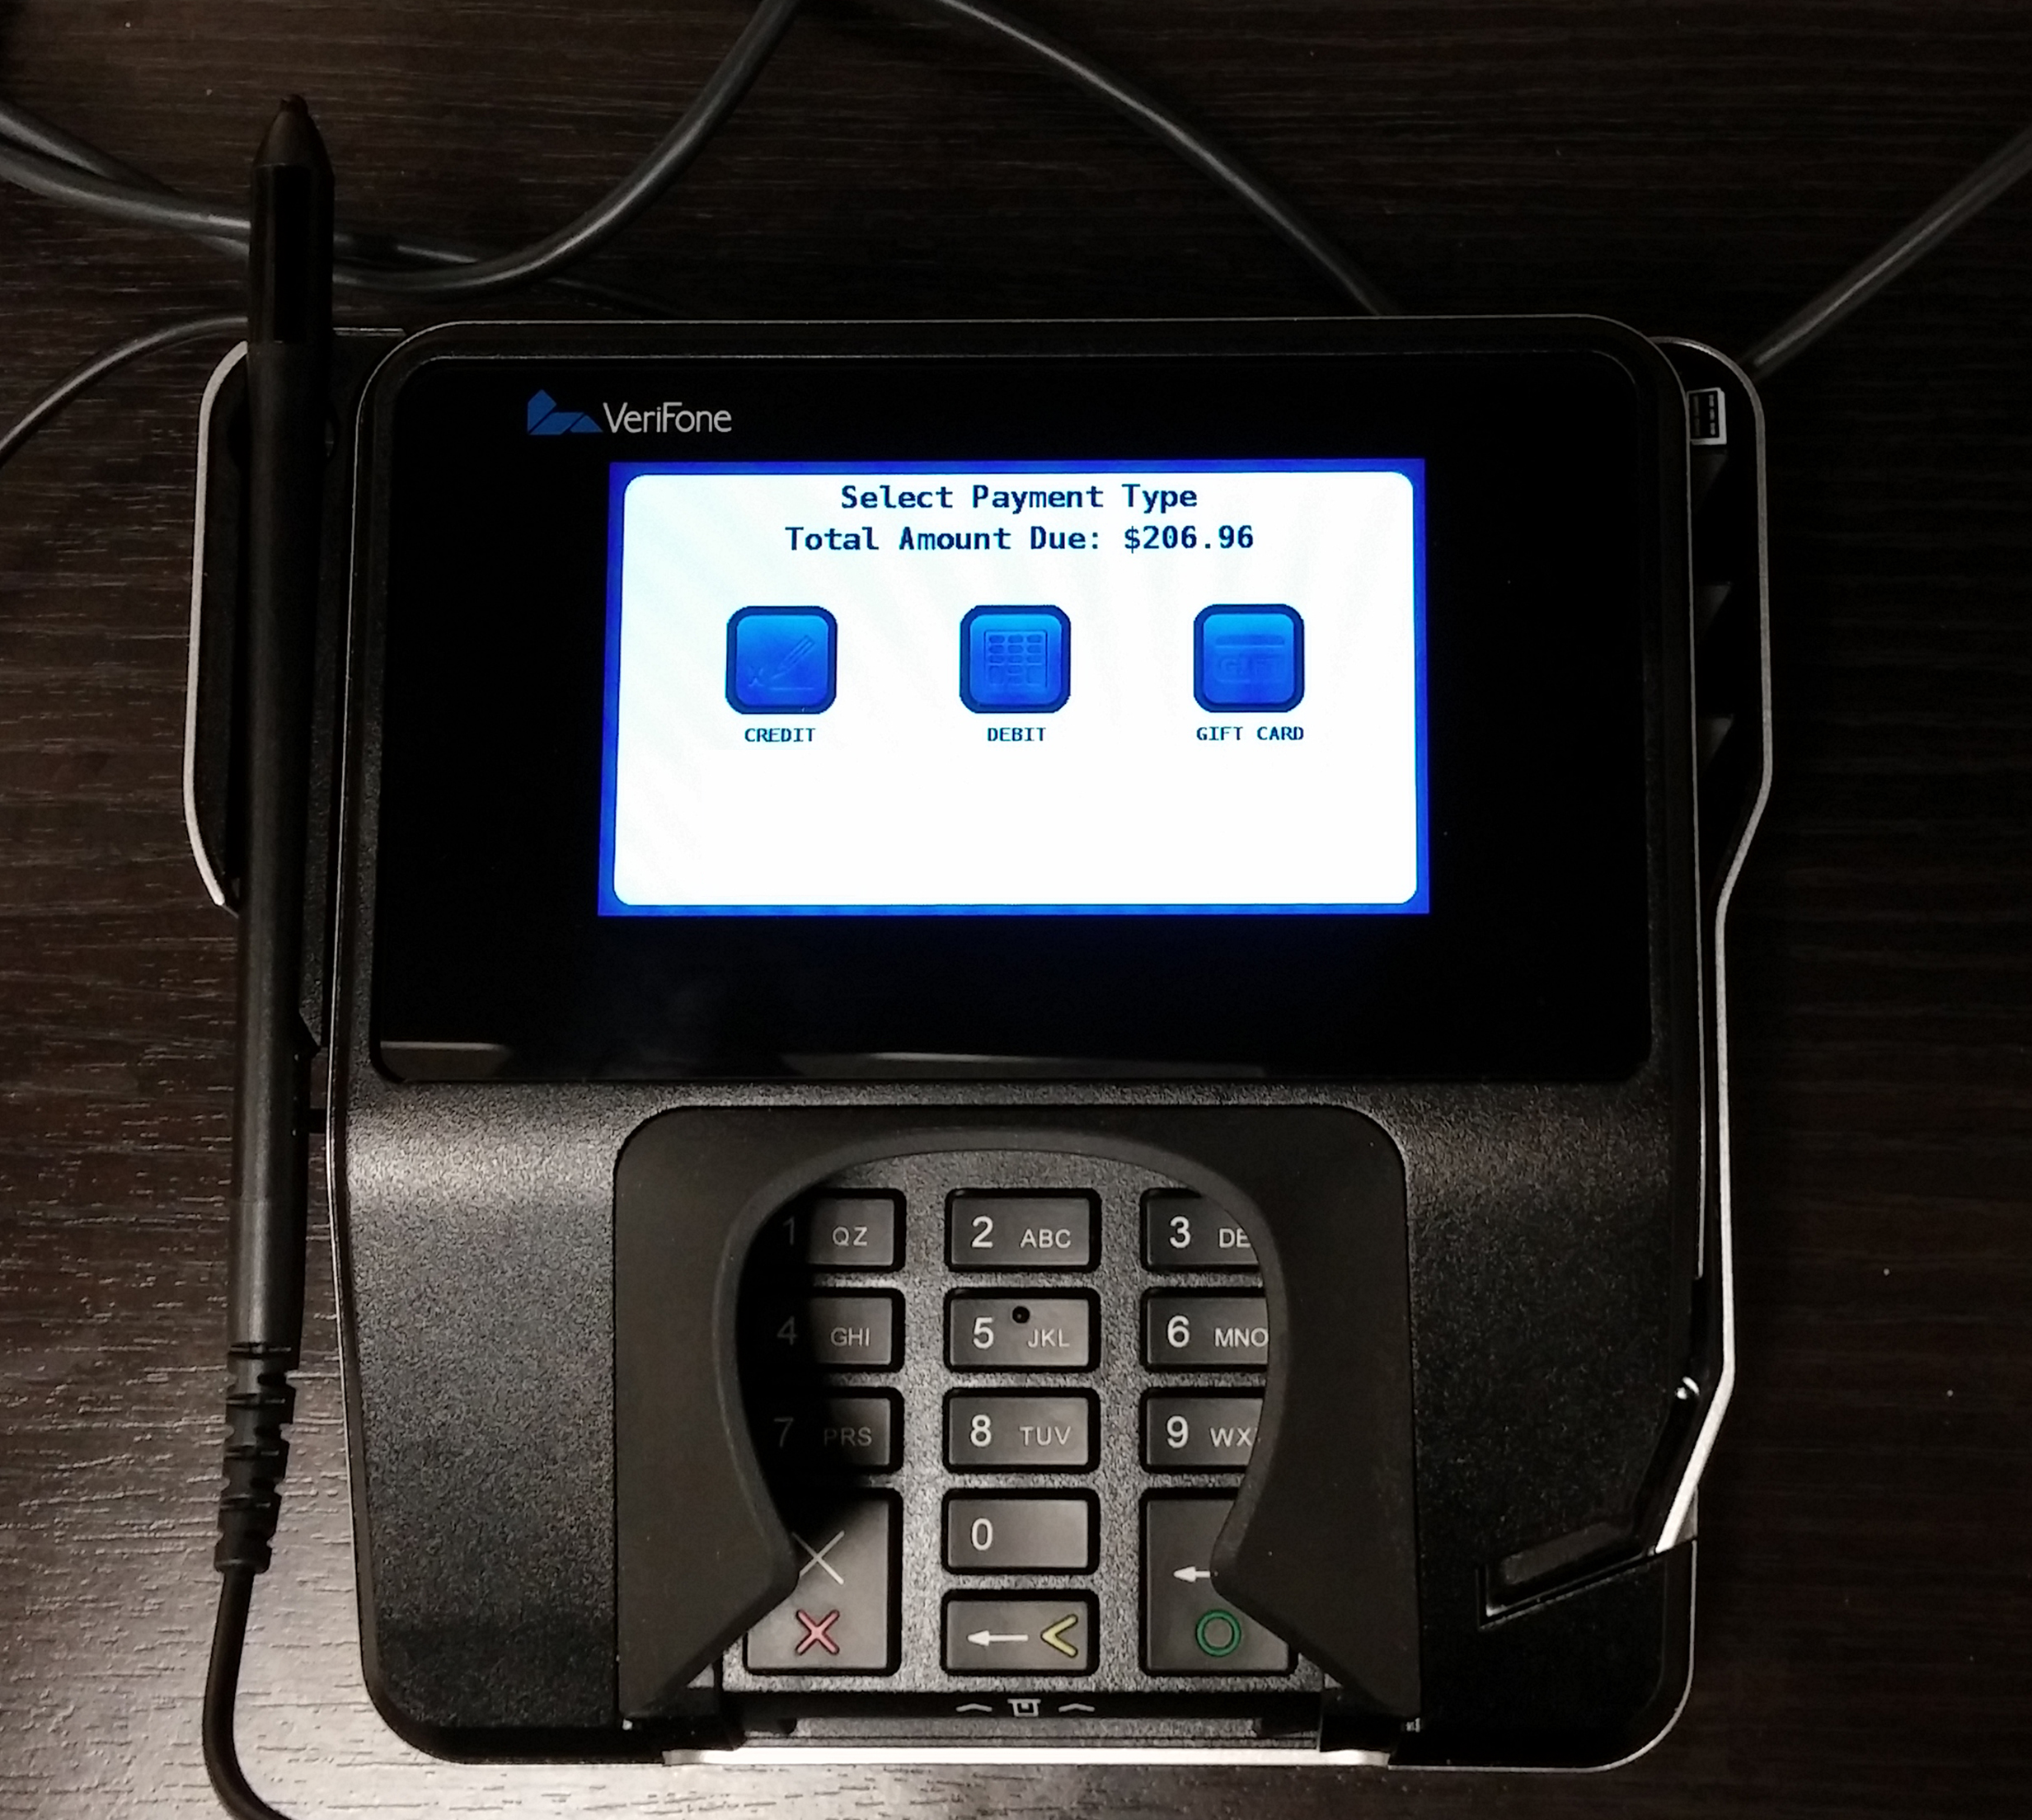 Verifone MX915 - Verifone Point (Select Payment Type)